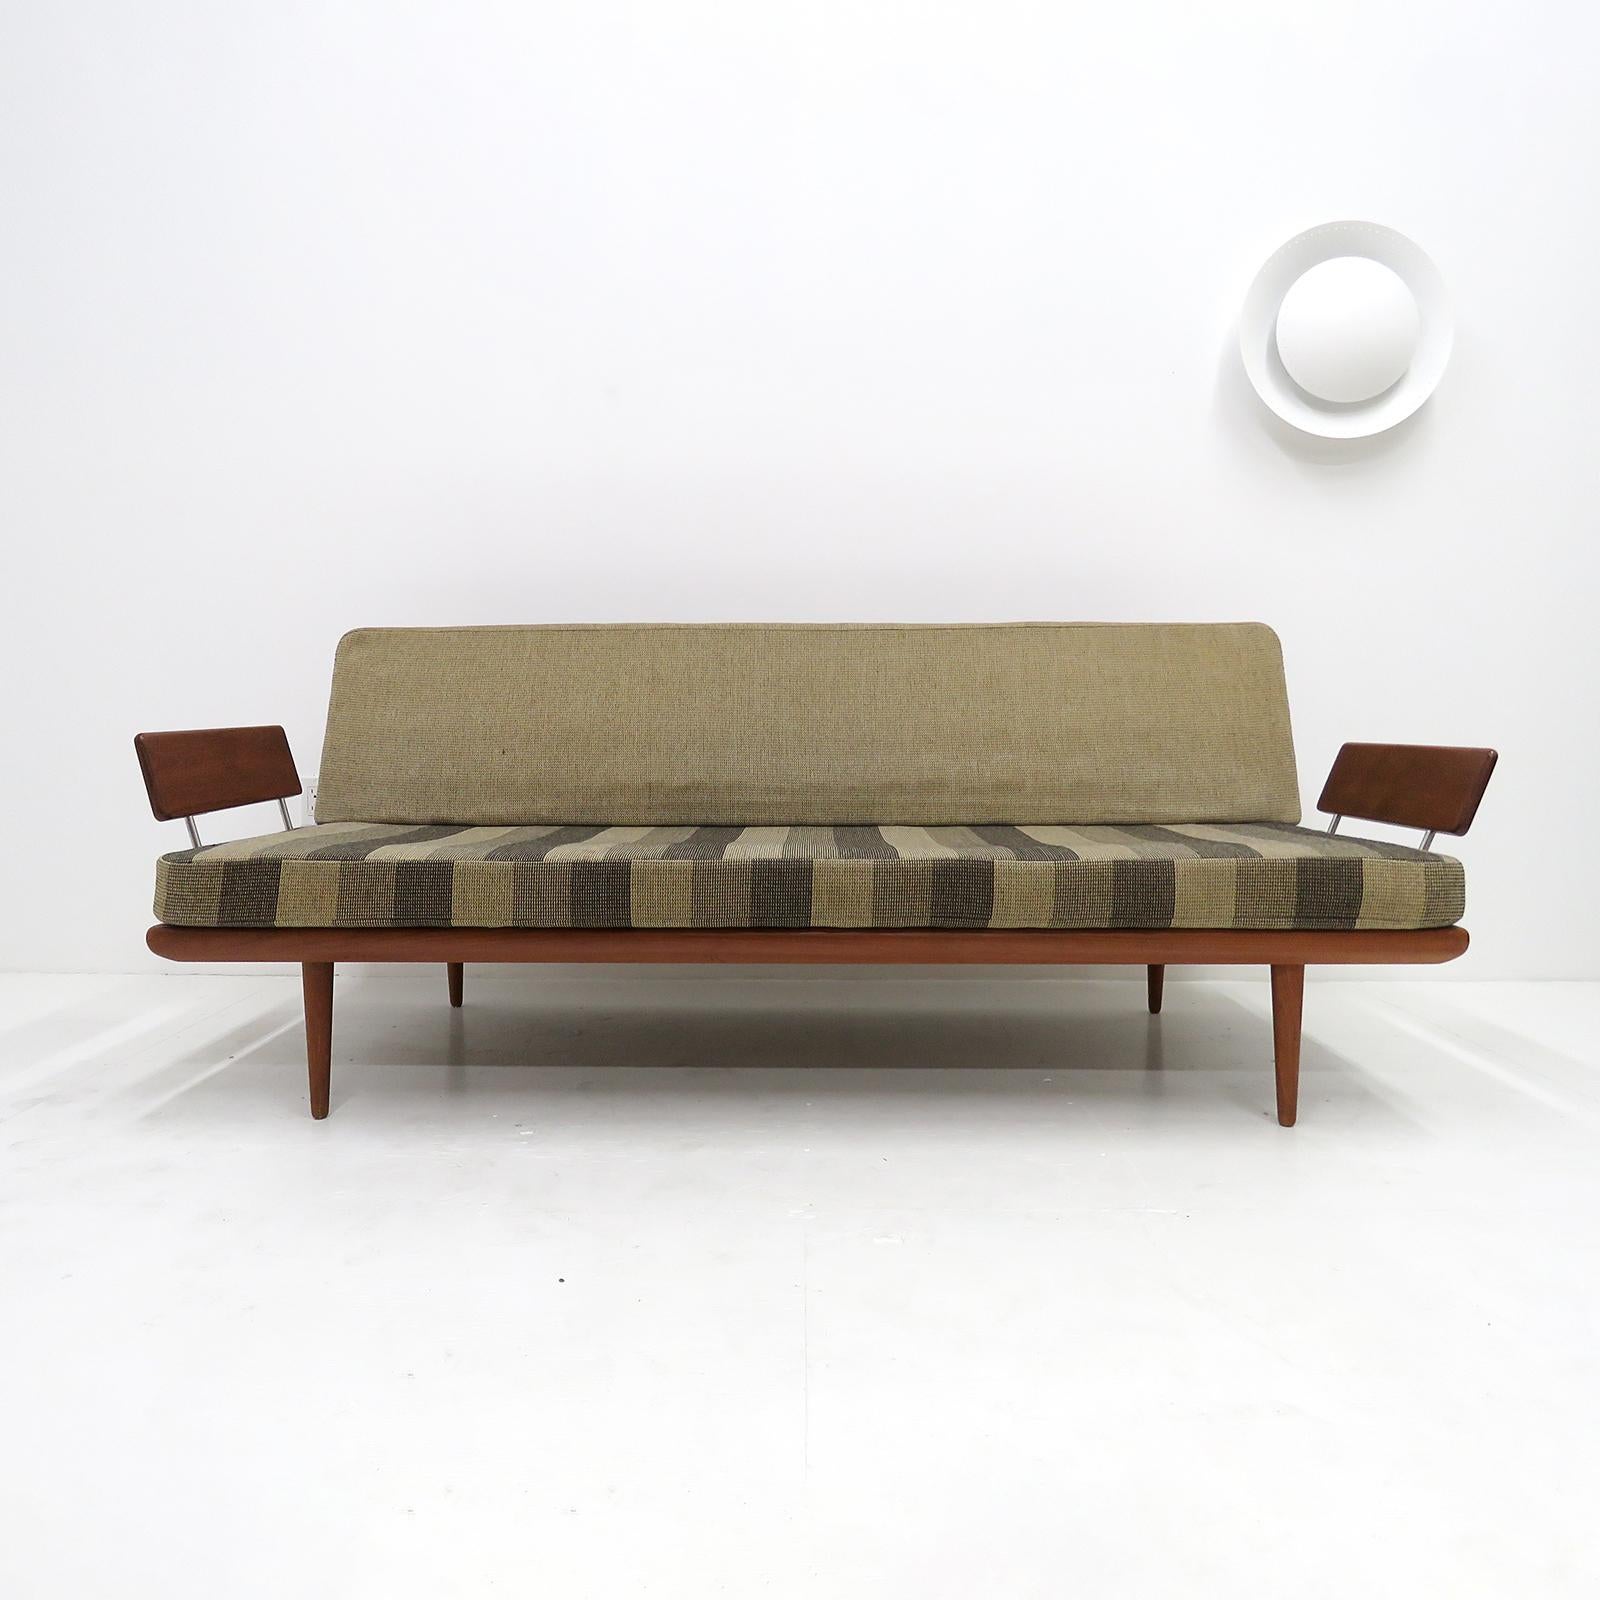 Wonderful daybed / sofa model FD 417 'Minerva' by Peter Hvidt & Orla Mølgaard Nielsen for France & Son, Denmark, 1960s with original spring core seat and back cushions, in original wool upholstery on a solid teak frame with chrome plated steel